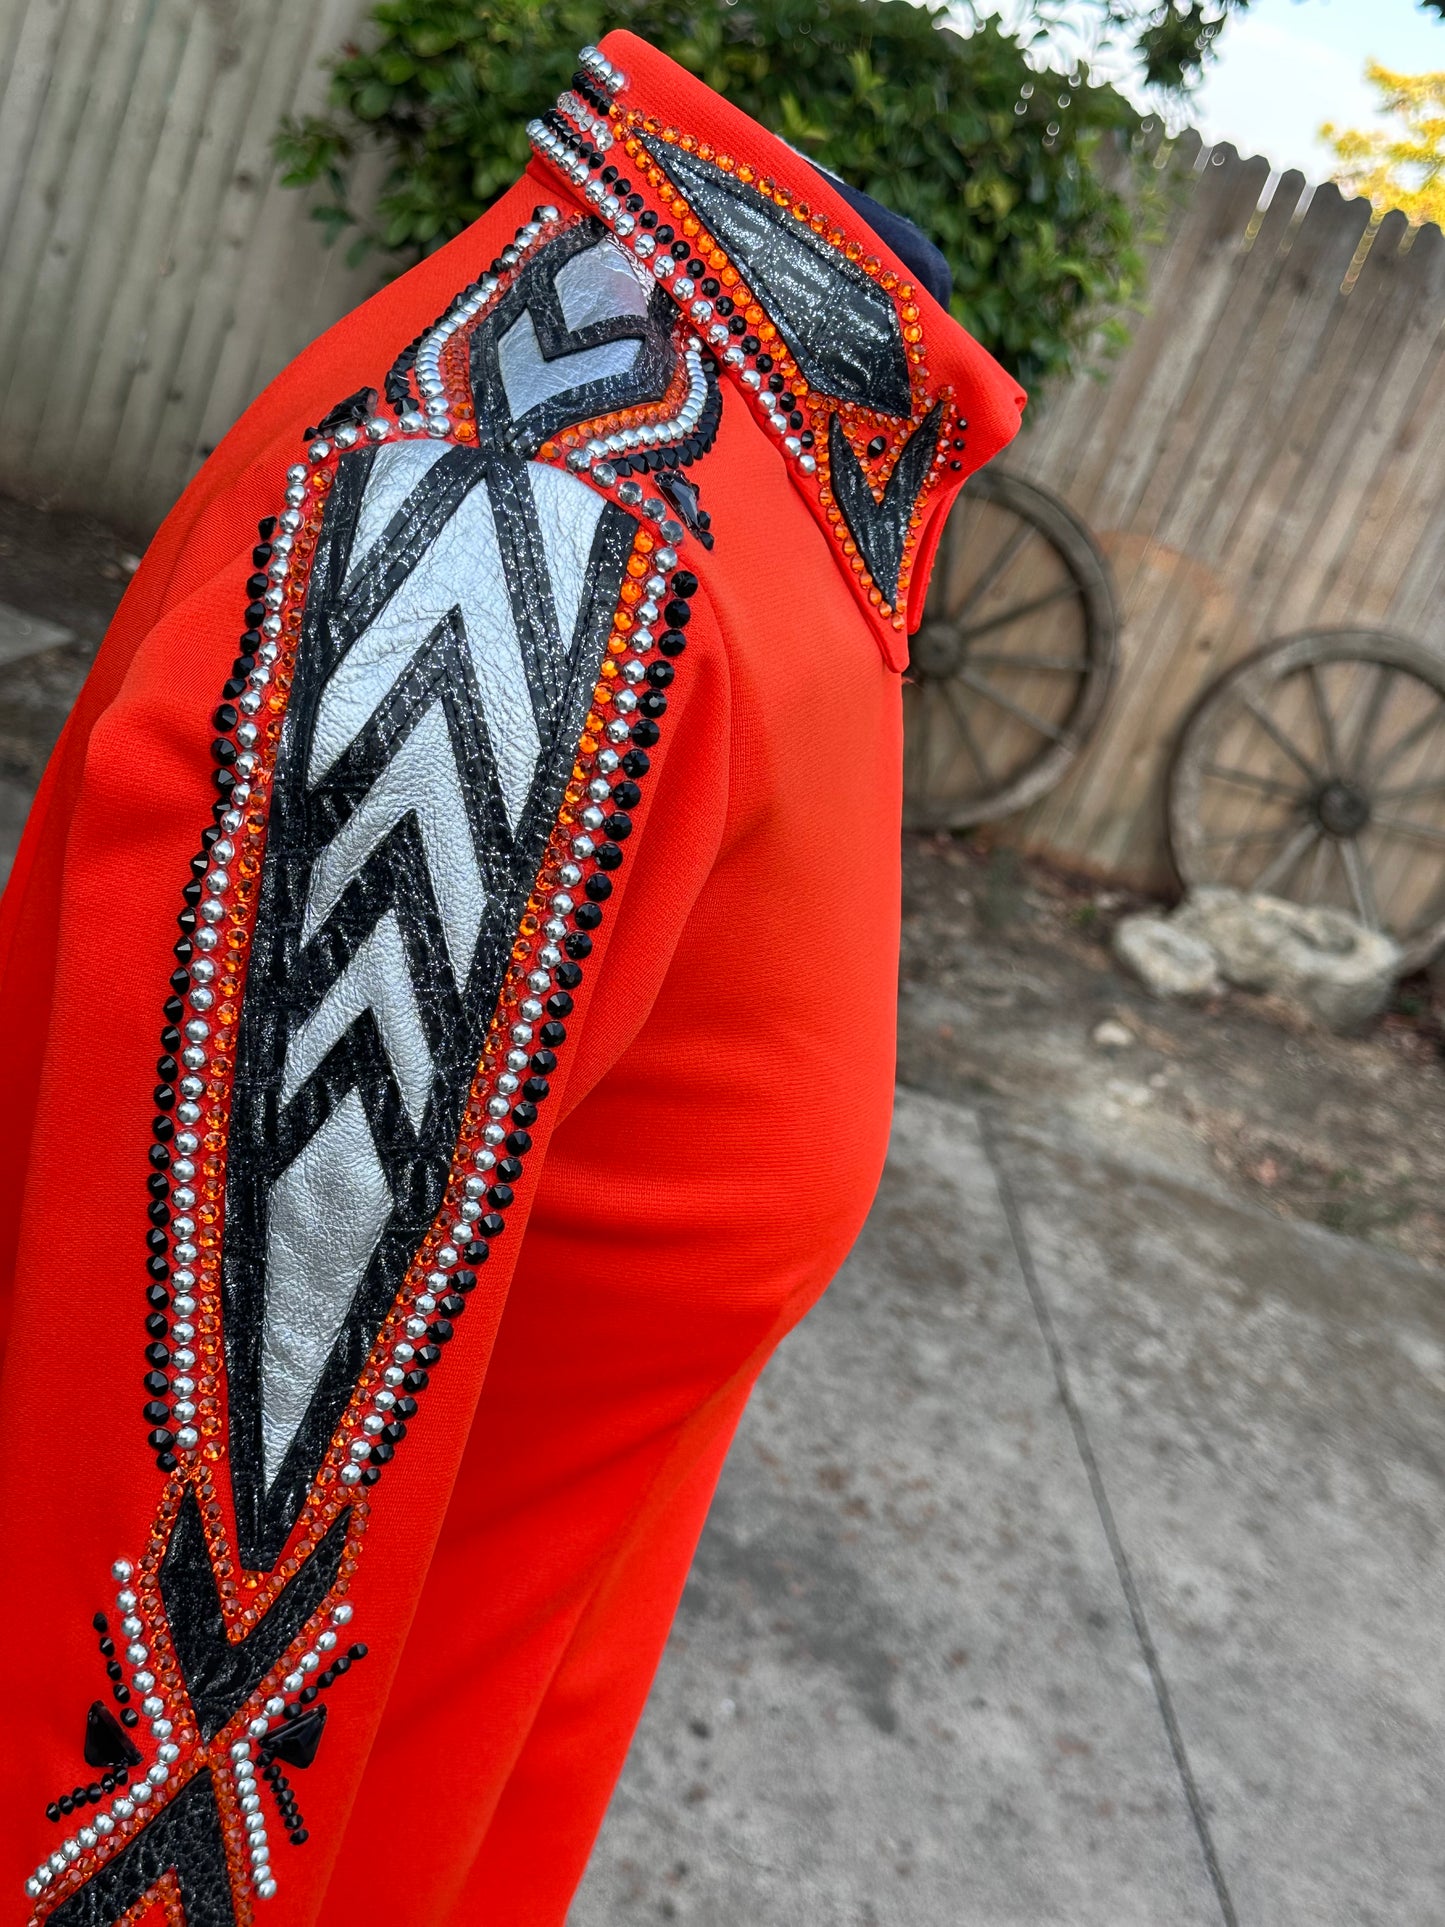 Size small day shirt bright orange, black and silver